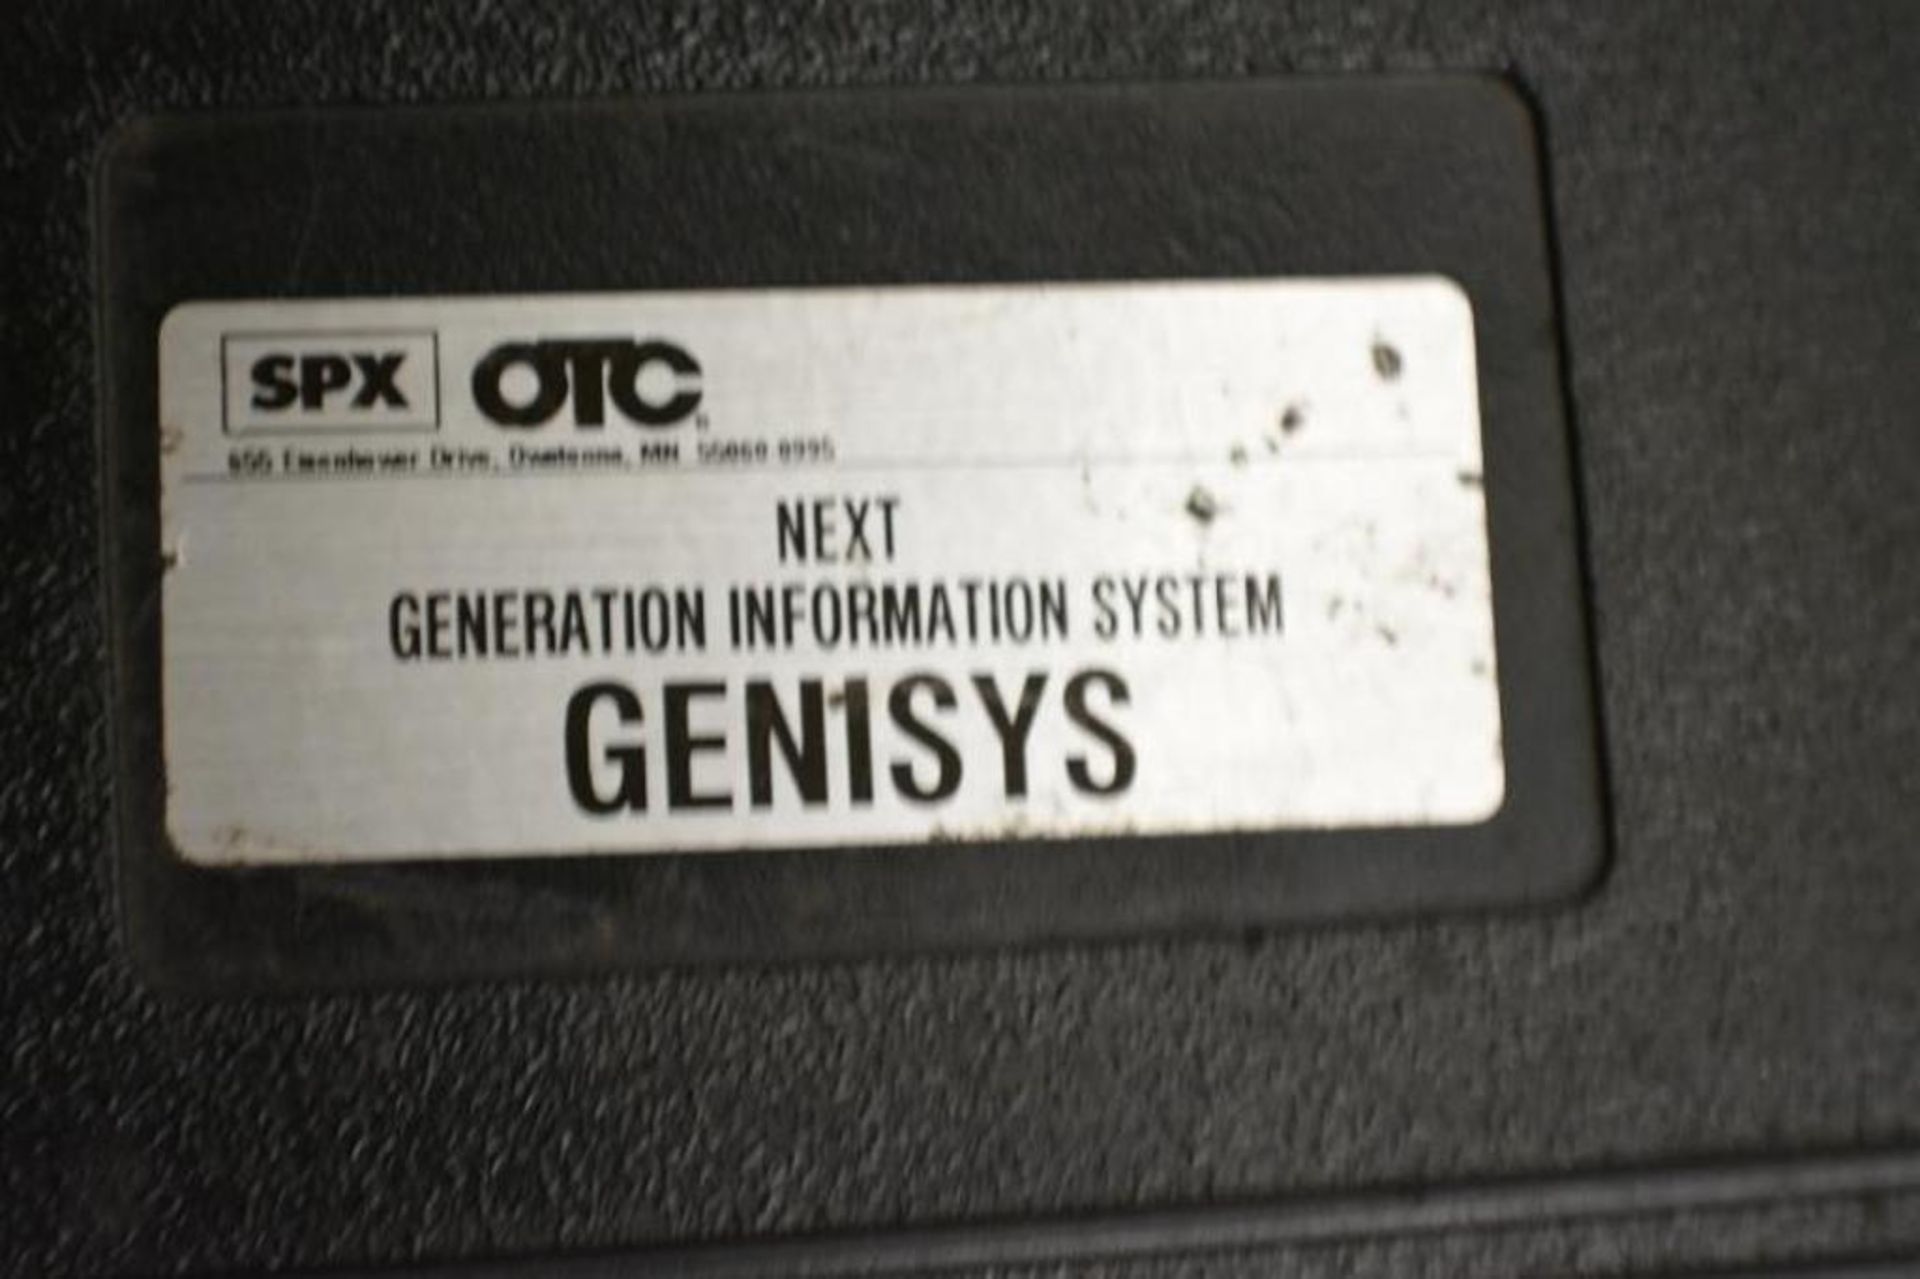 Diagnostic Scanner Genisys SPX OTC 2002 with Cables and Software Suite - Image 2 of 18